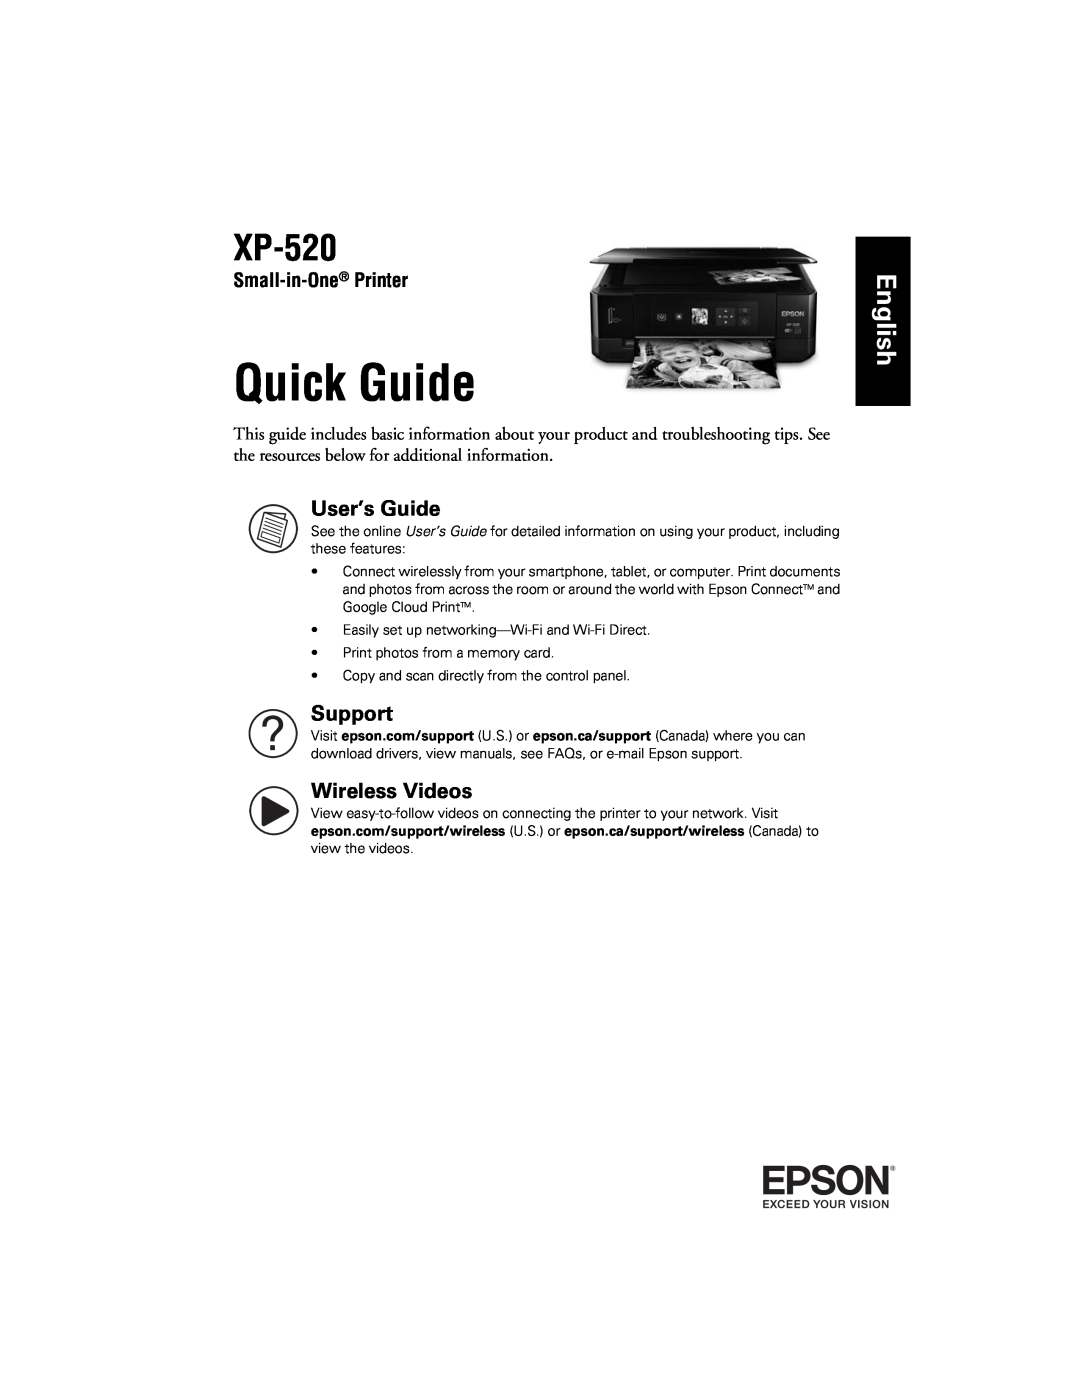 Epson XP-520 manual Quick Guide, English, User’s Guide, Support, Wireless Videos, Small-in-One Printer 